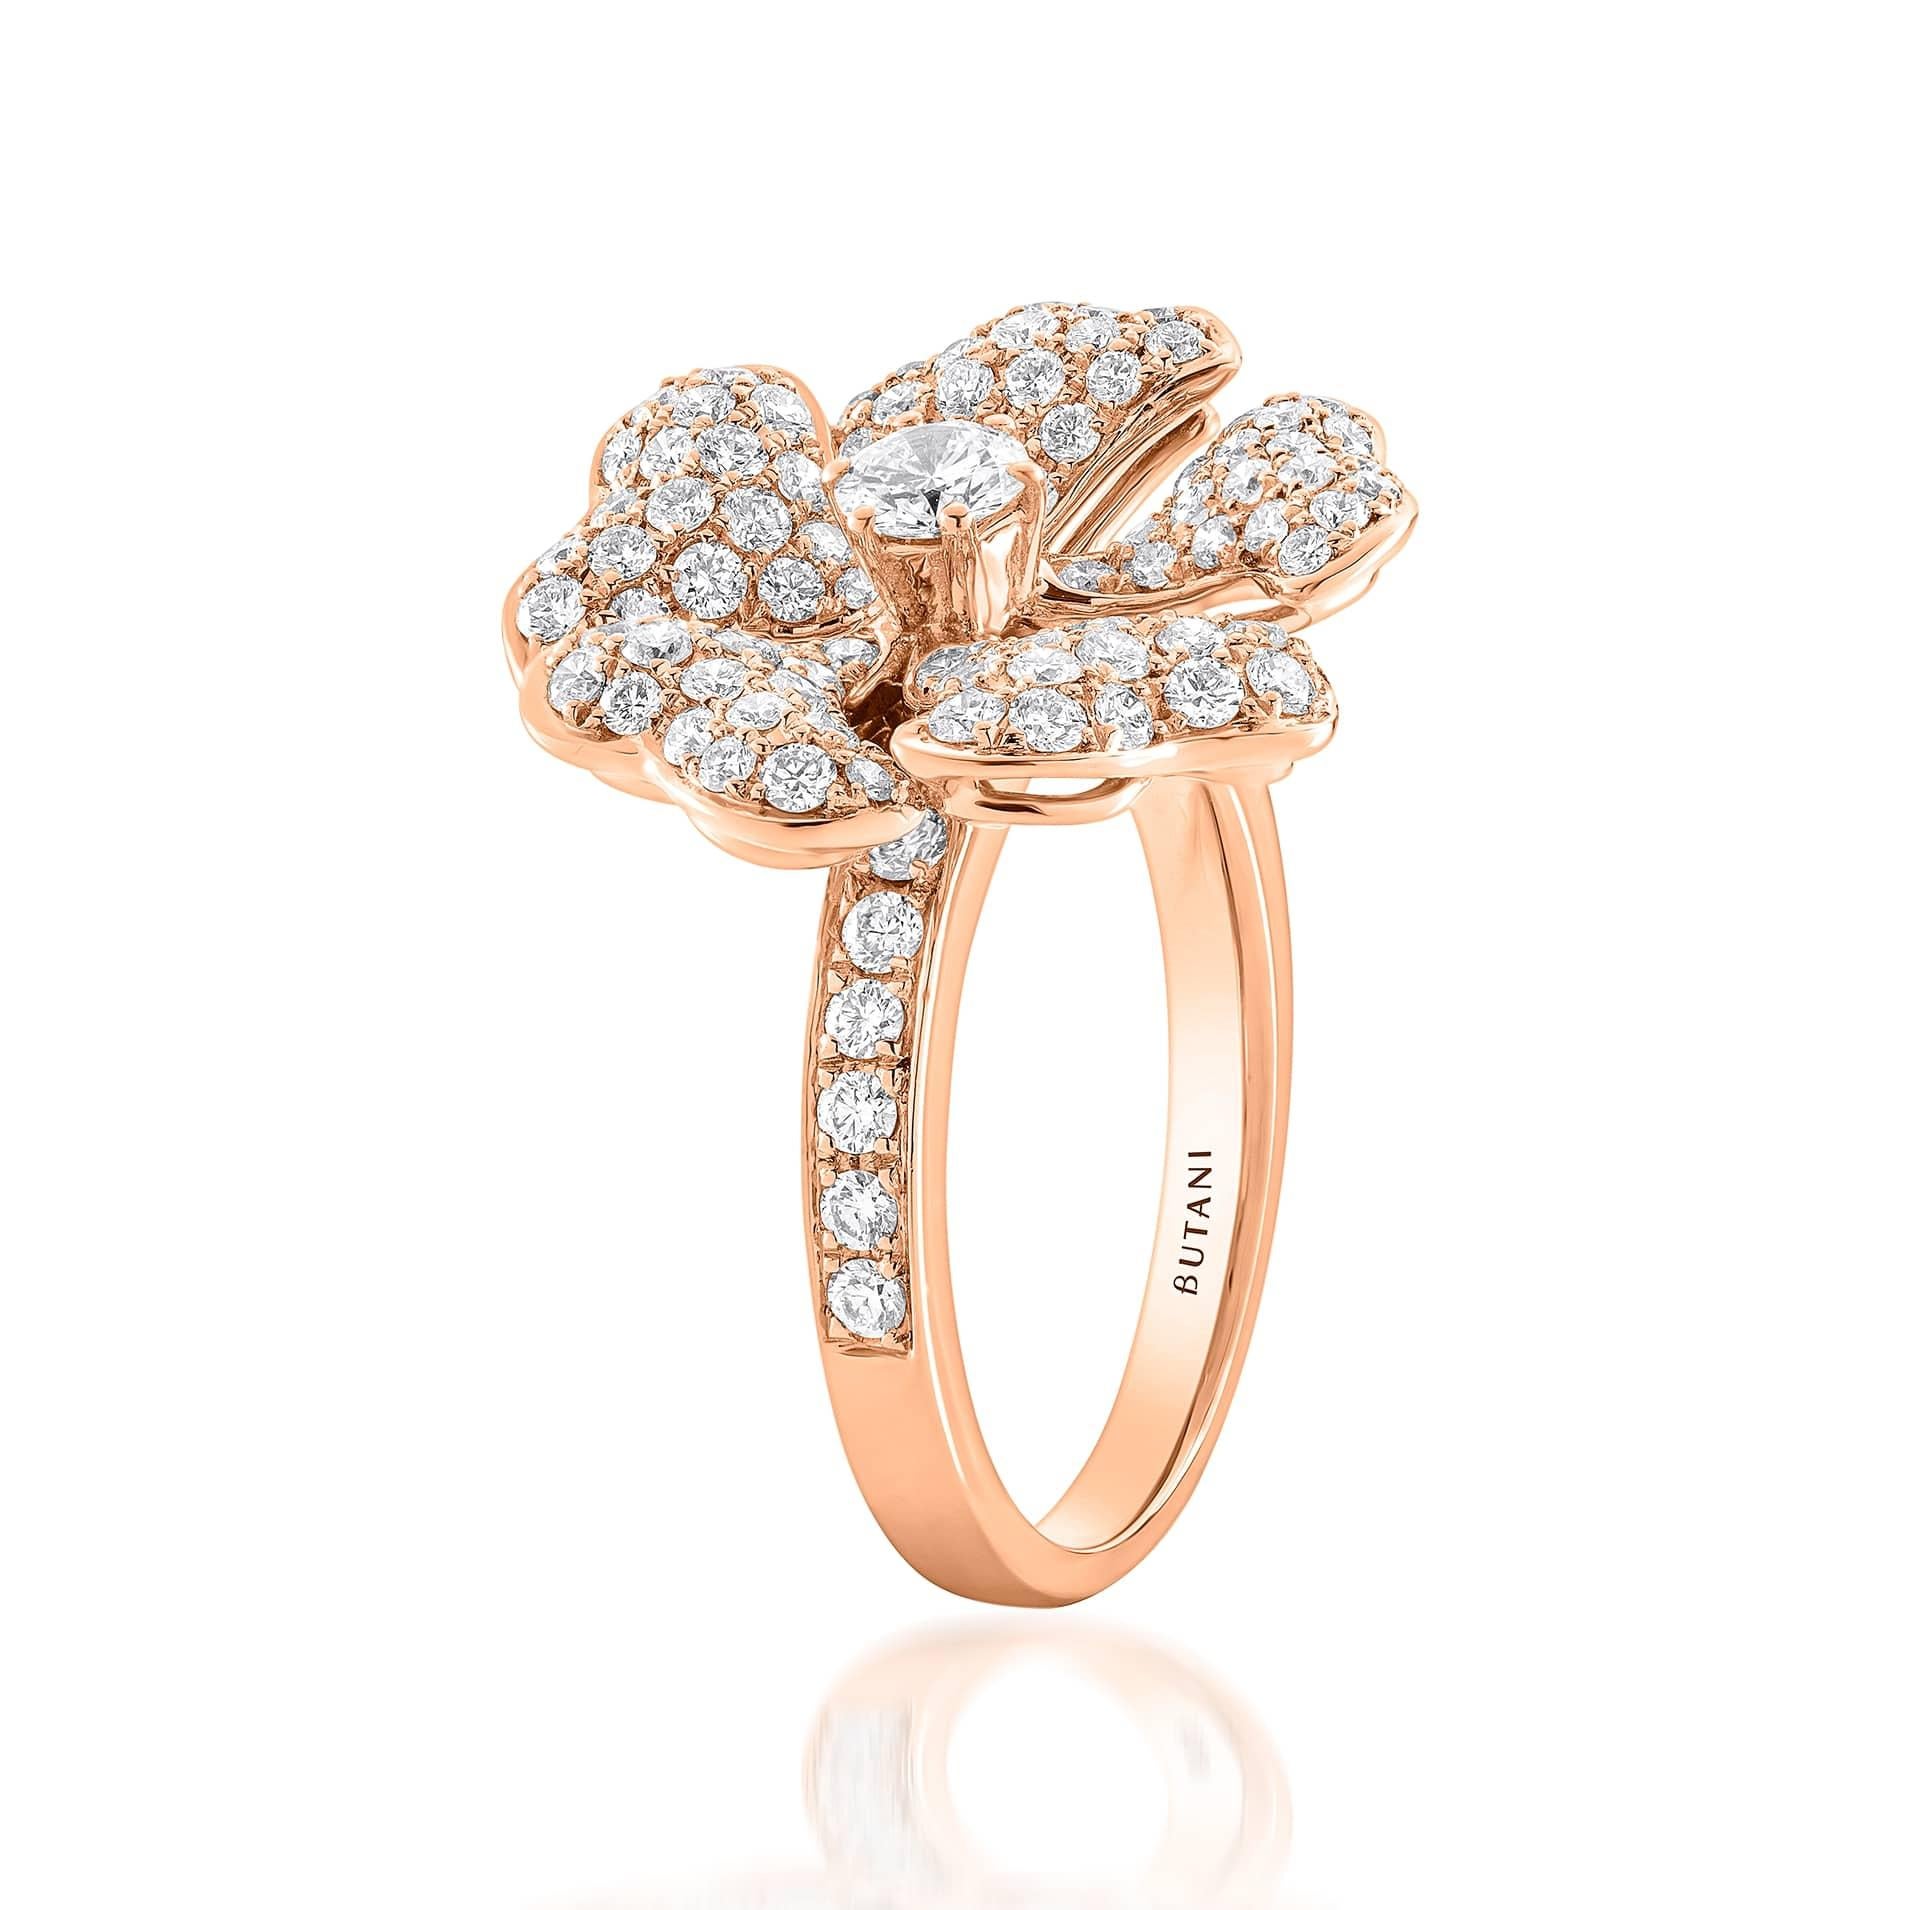 Bloom Gold and Pavé Diamond Ring in 18K Rose Gold

Inspired by the exquisite petals of the alpine cinquefoil flower, the Bloom collection combines the richness of diamonds and precious metals with the light versatility of this delicate, five-pointed